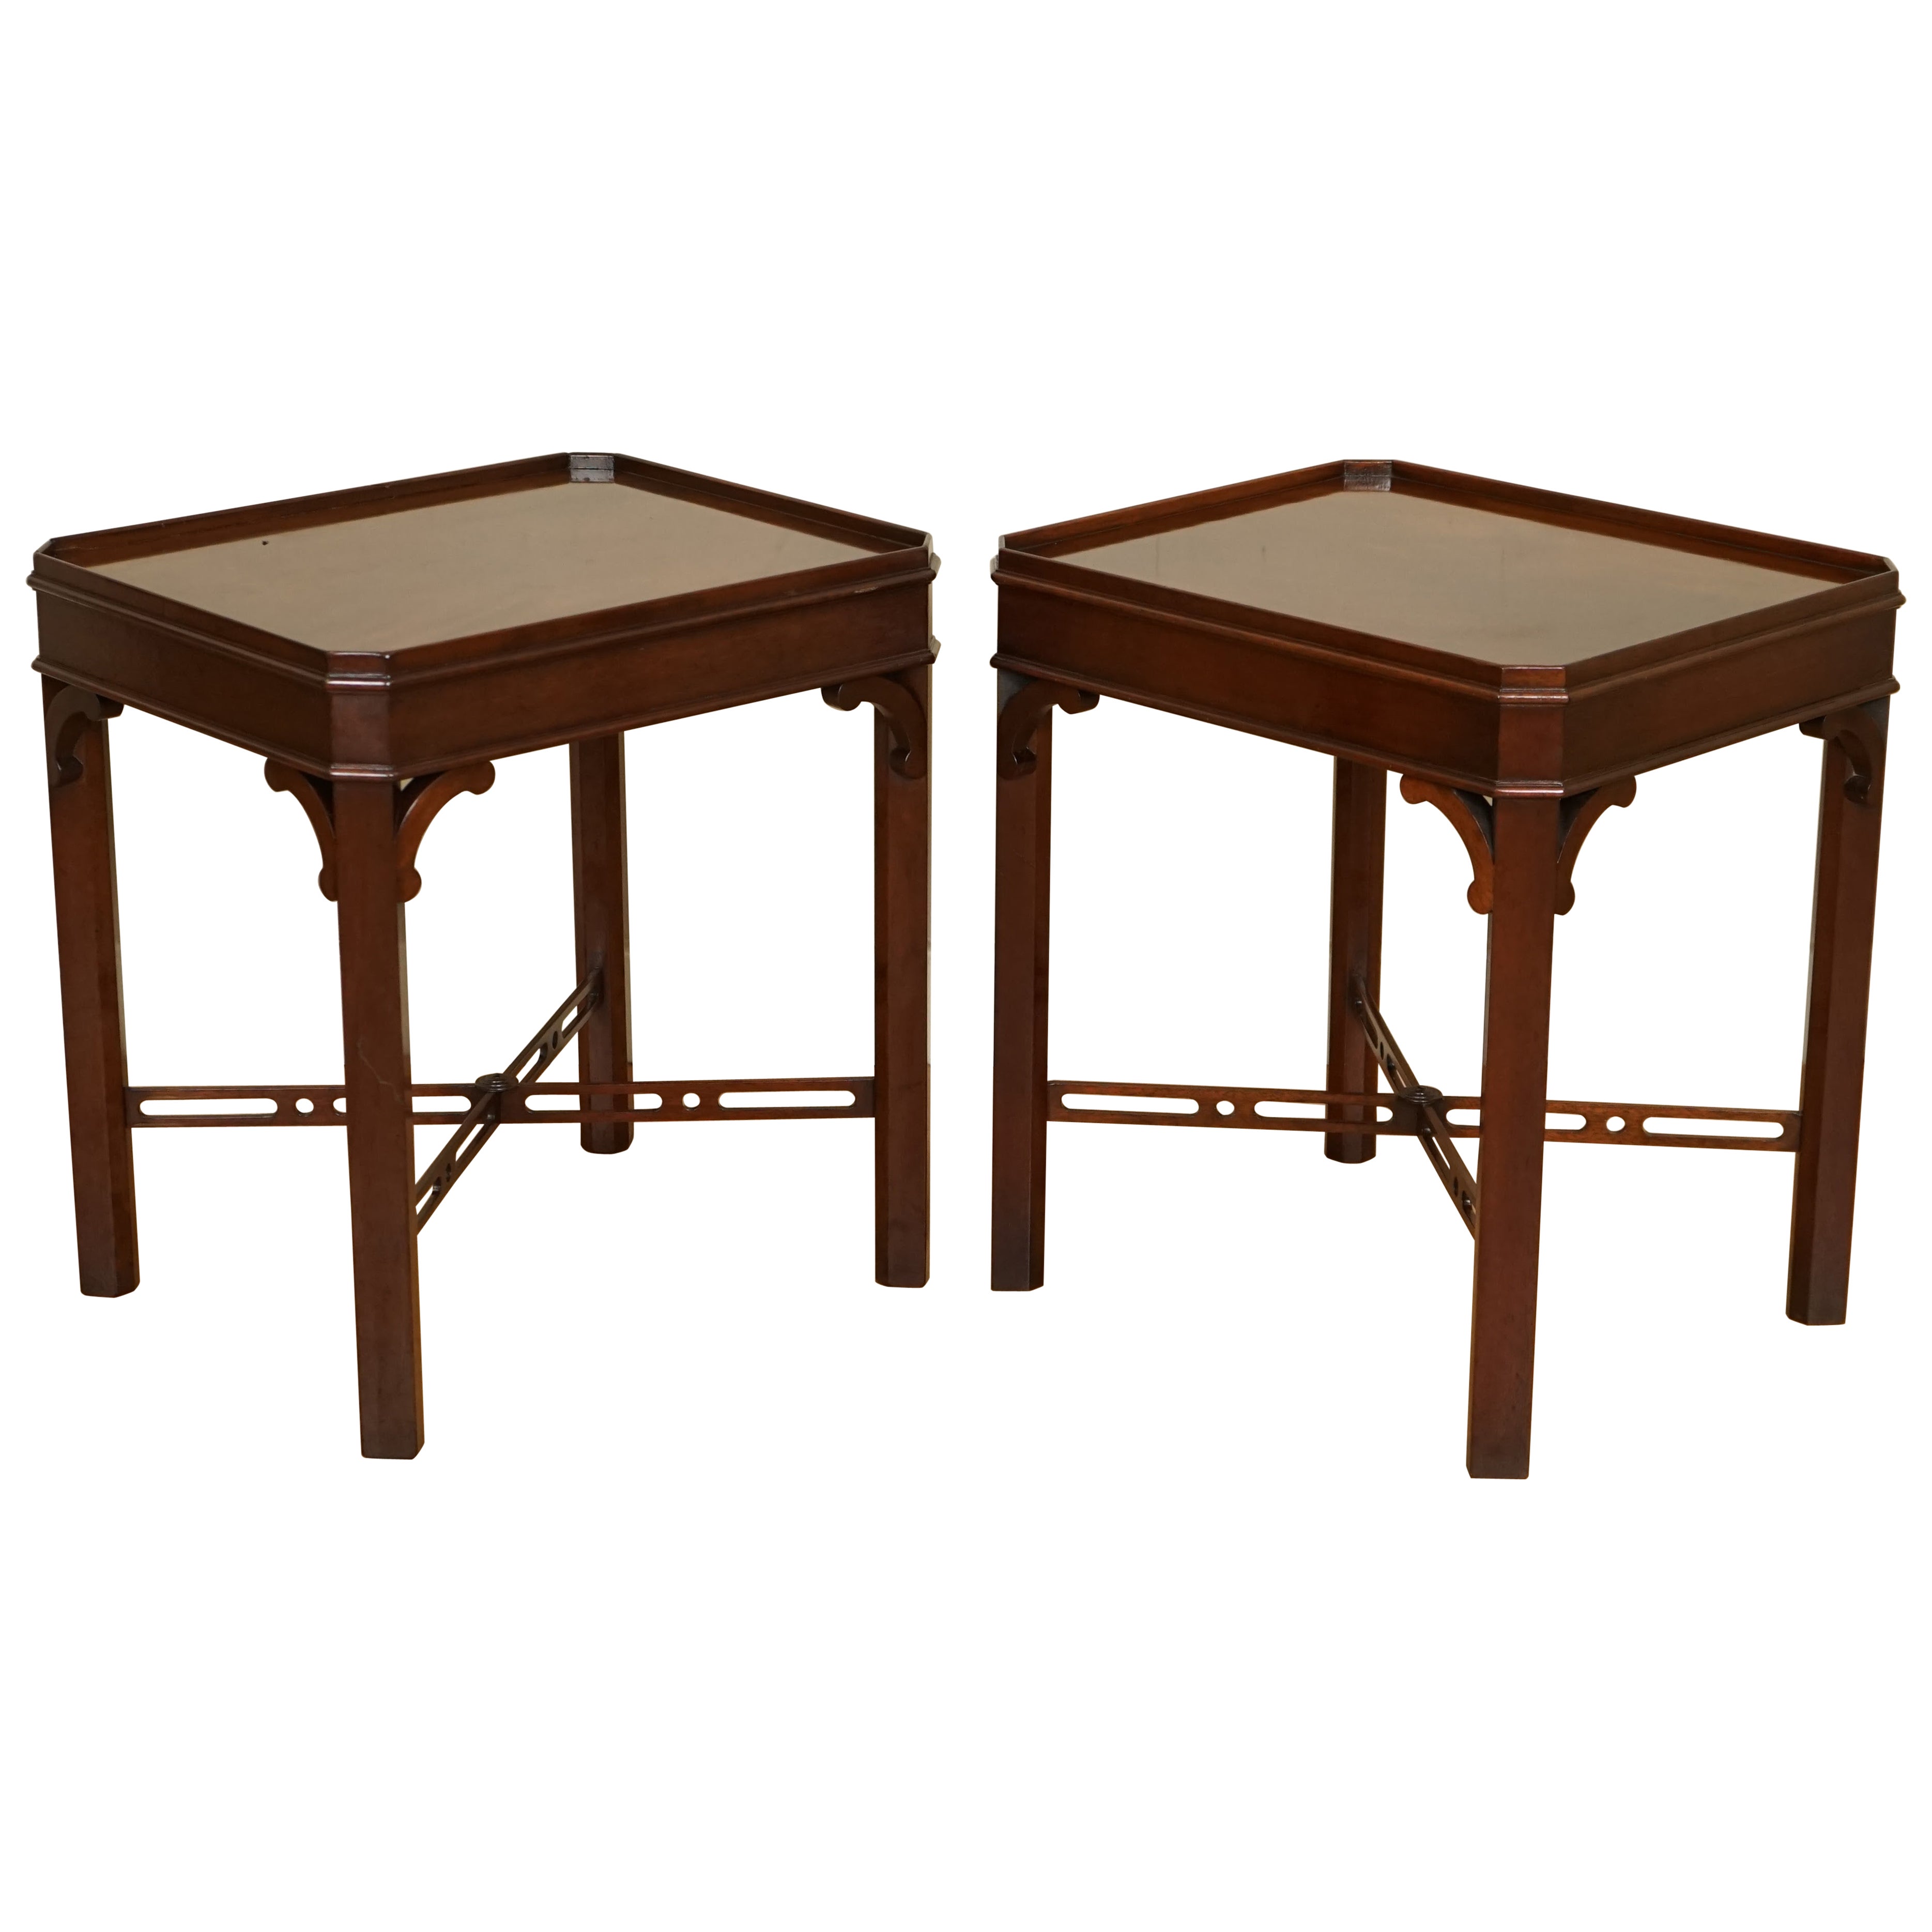 Vintage Pair of Chippendale Style Mahogany Side End Tables Early 20th Century